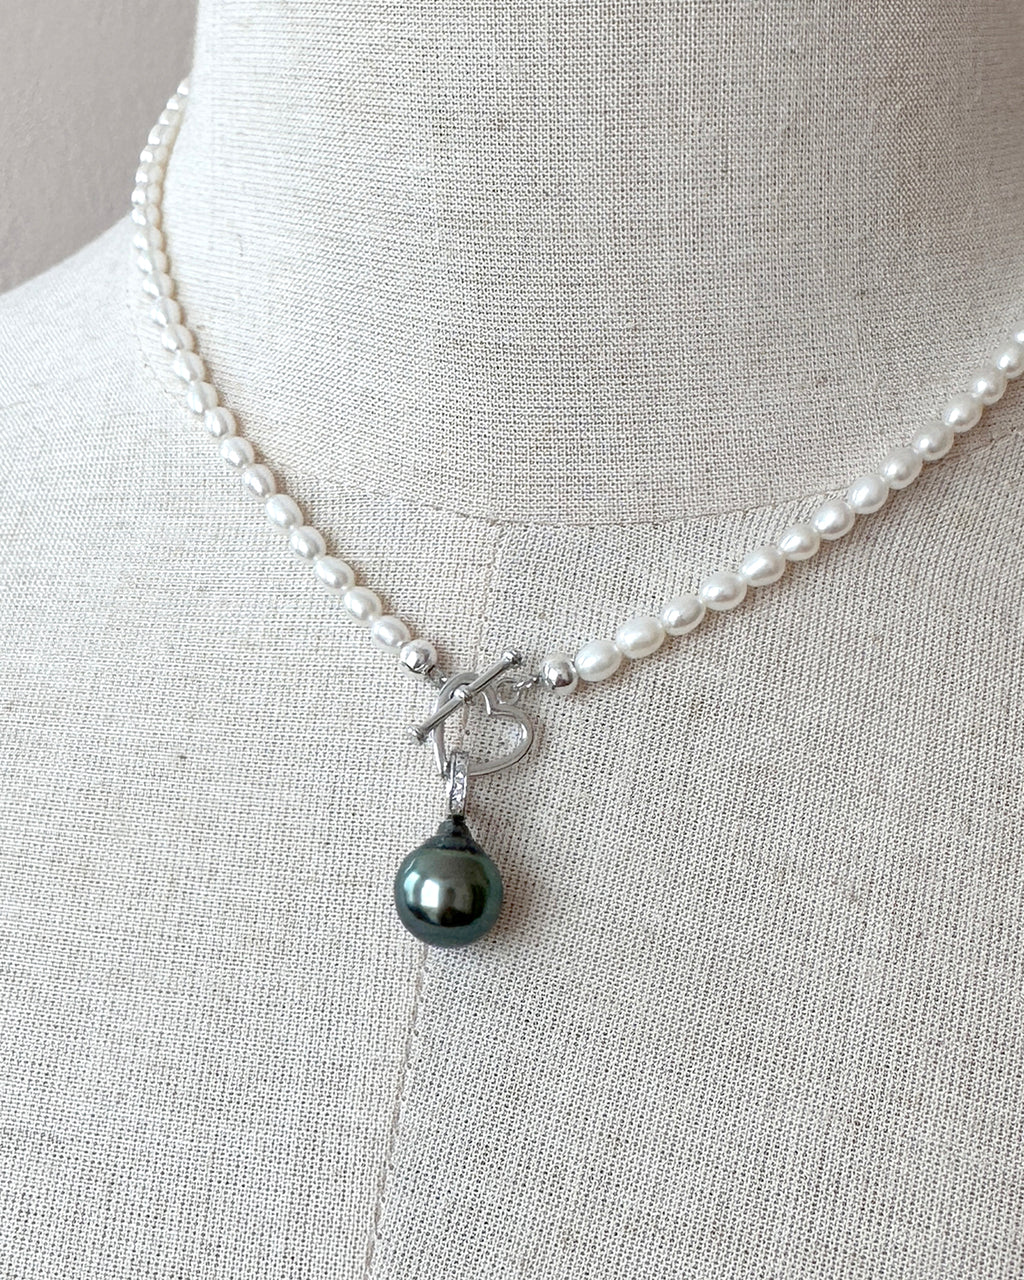 Tiny Freshwater Pearl Necklace